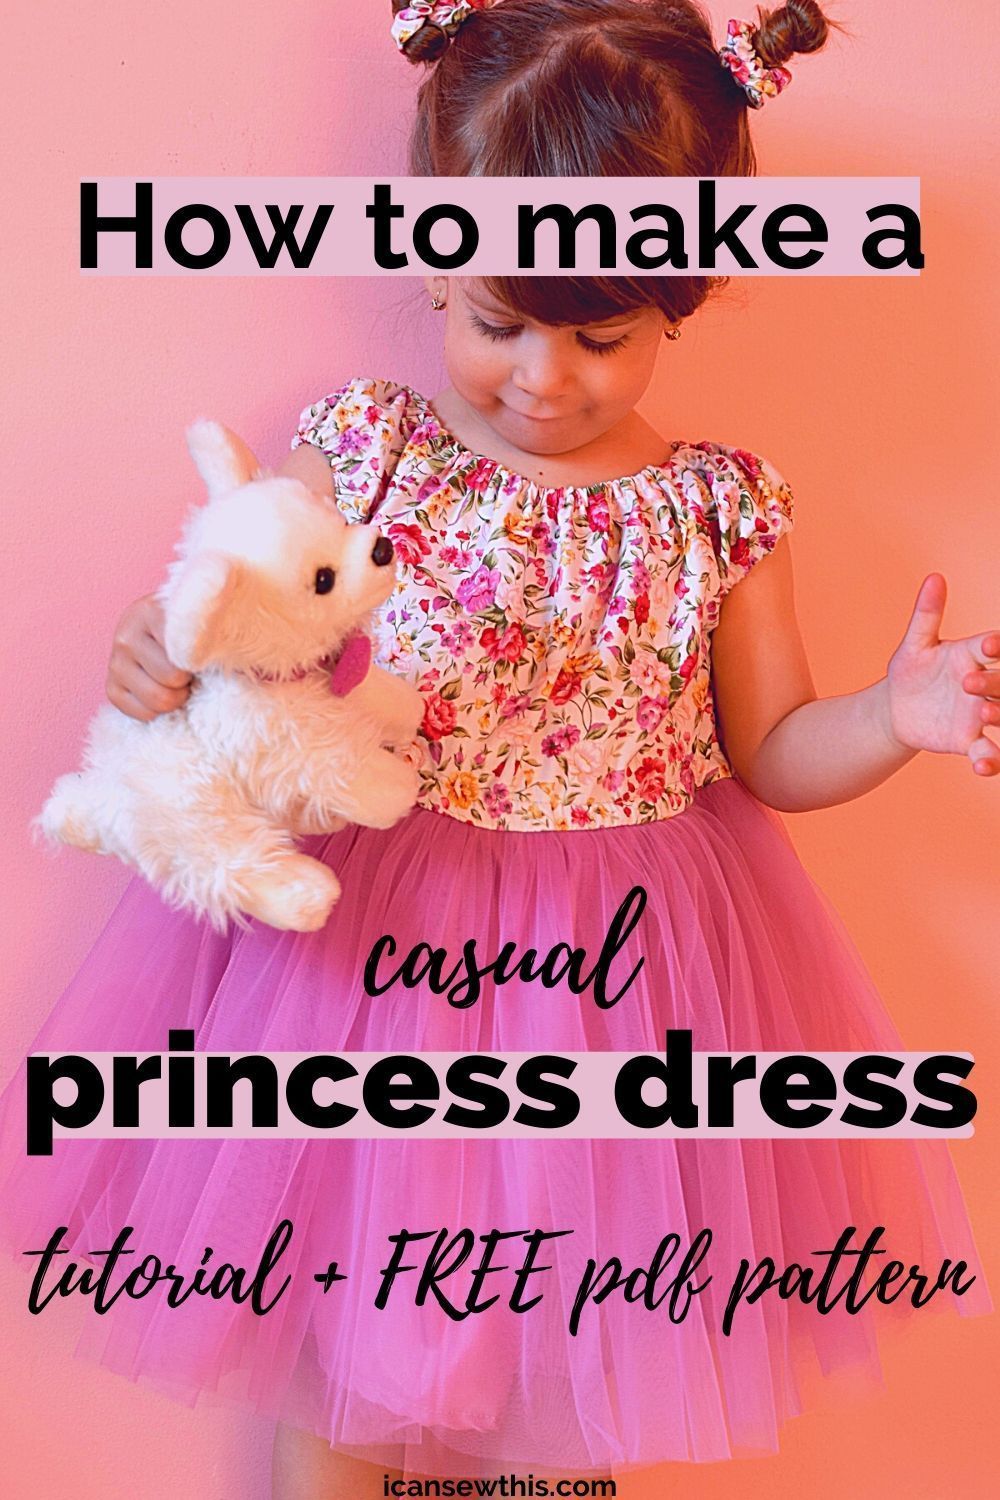 Casual princess dress for girls (tutorial + free pattern) - I can sew this -   19 dress Patterns princess ideas